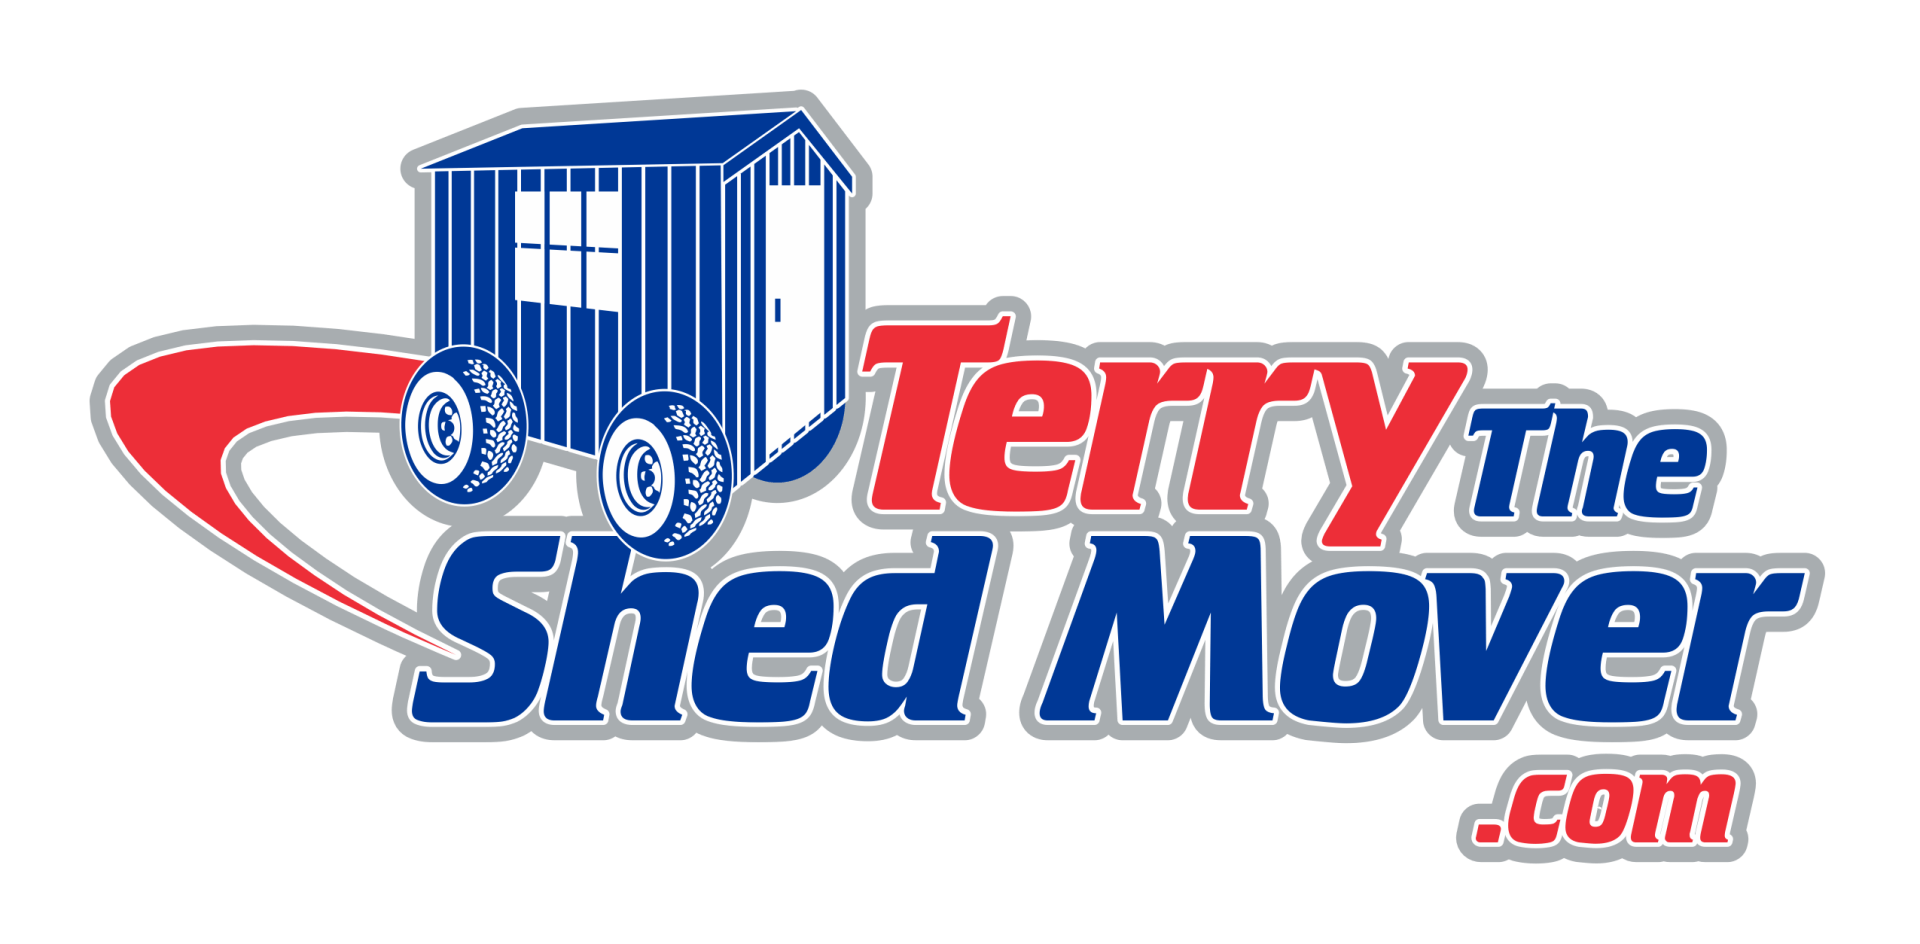 Shed Mover in Reno, NV | Terry The Shed Mover, LLC